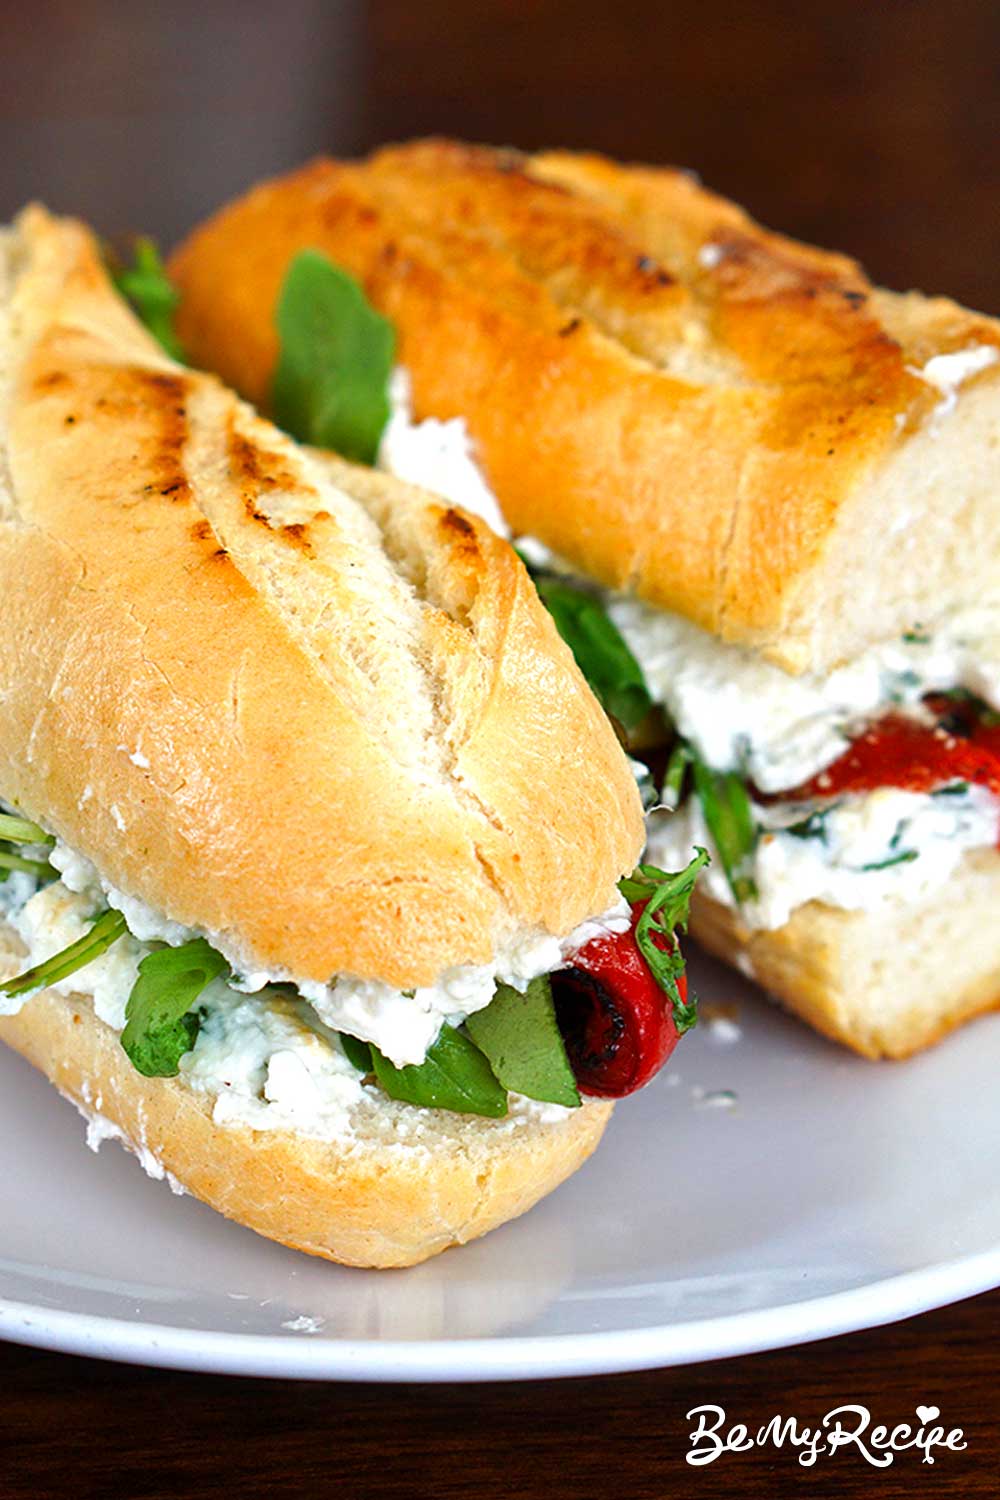 Easy and Quick Feta Sandwich with Roasted Peppers and Basil